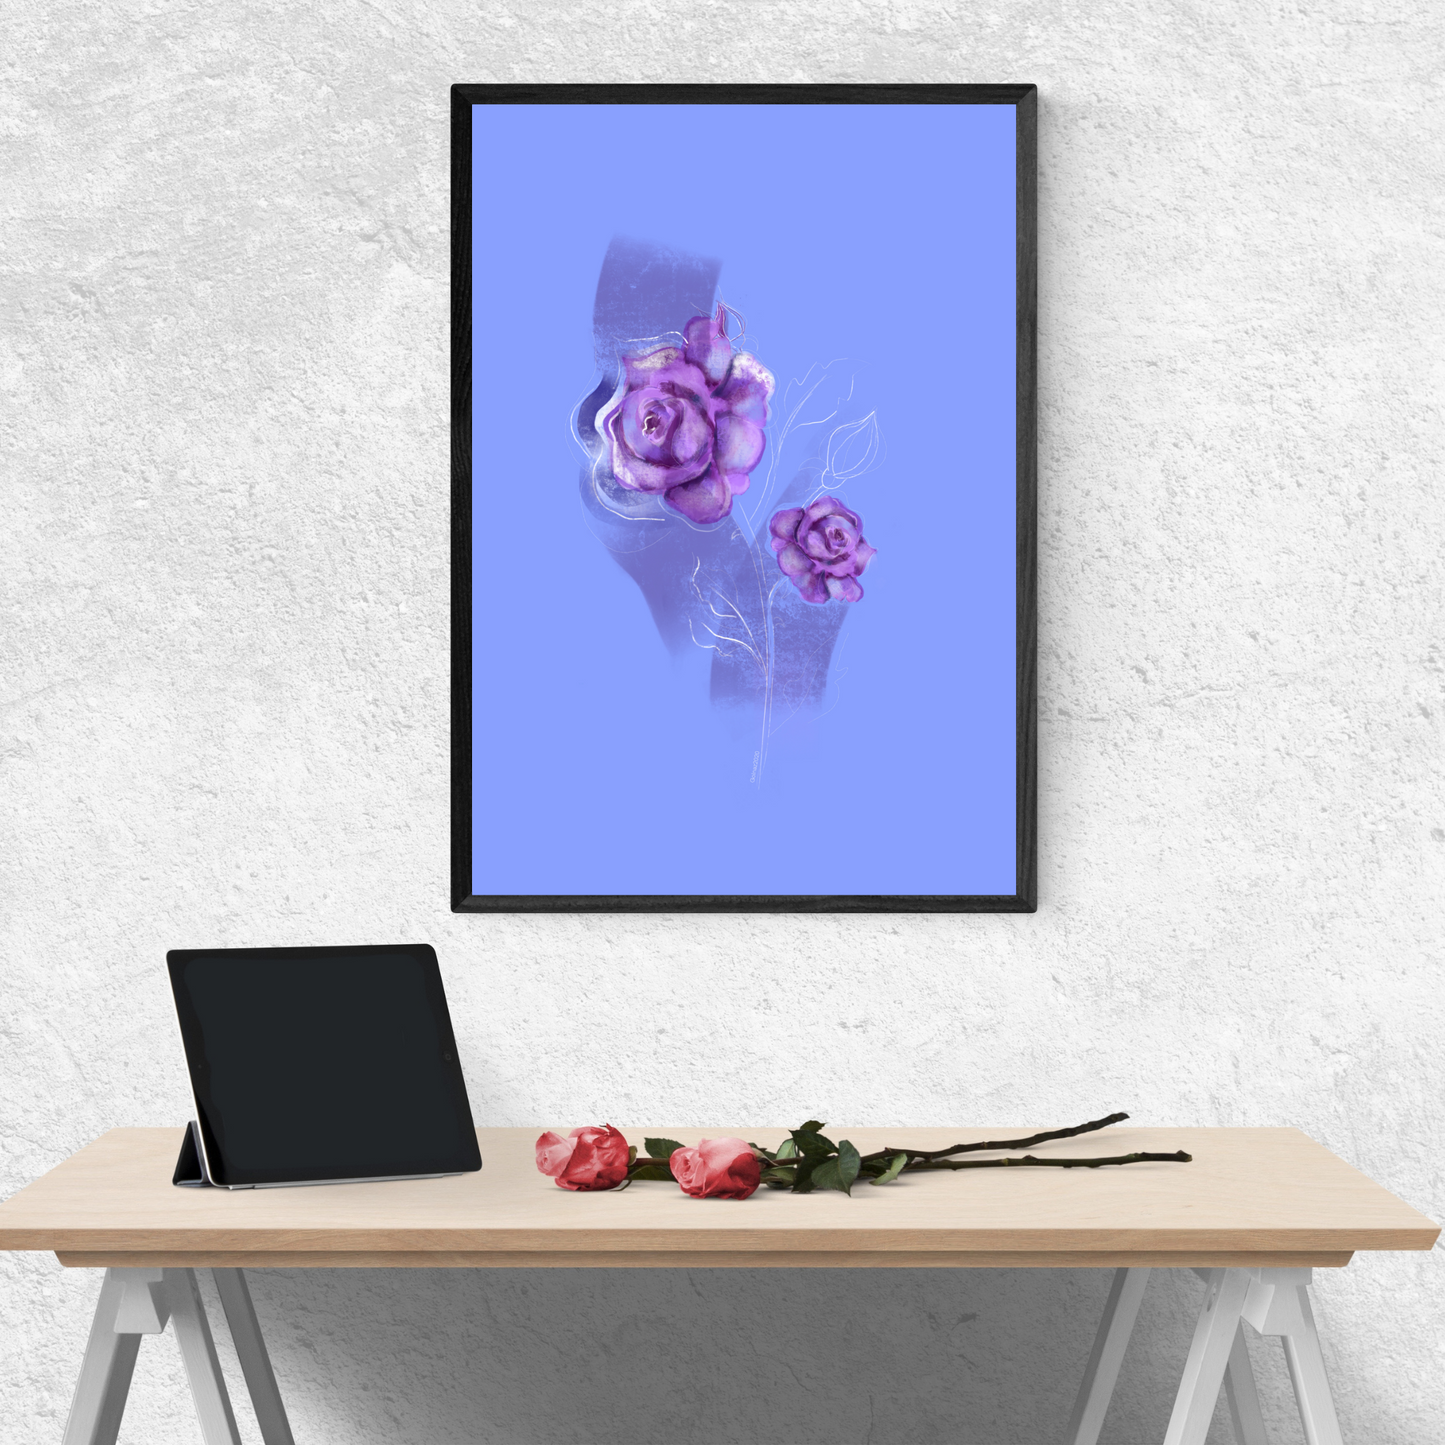 An example of the Rose painting by ArisaTeam over a desk with a monitor and 2 roses